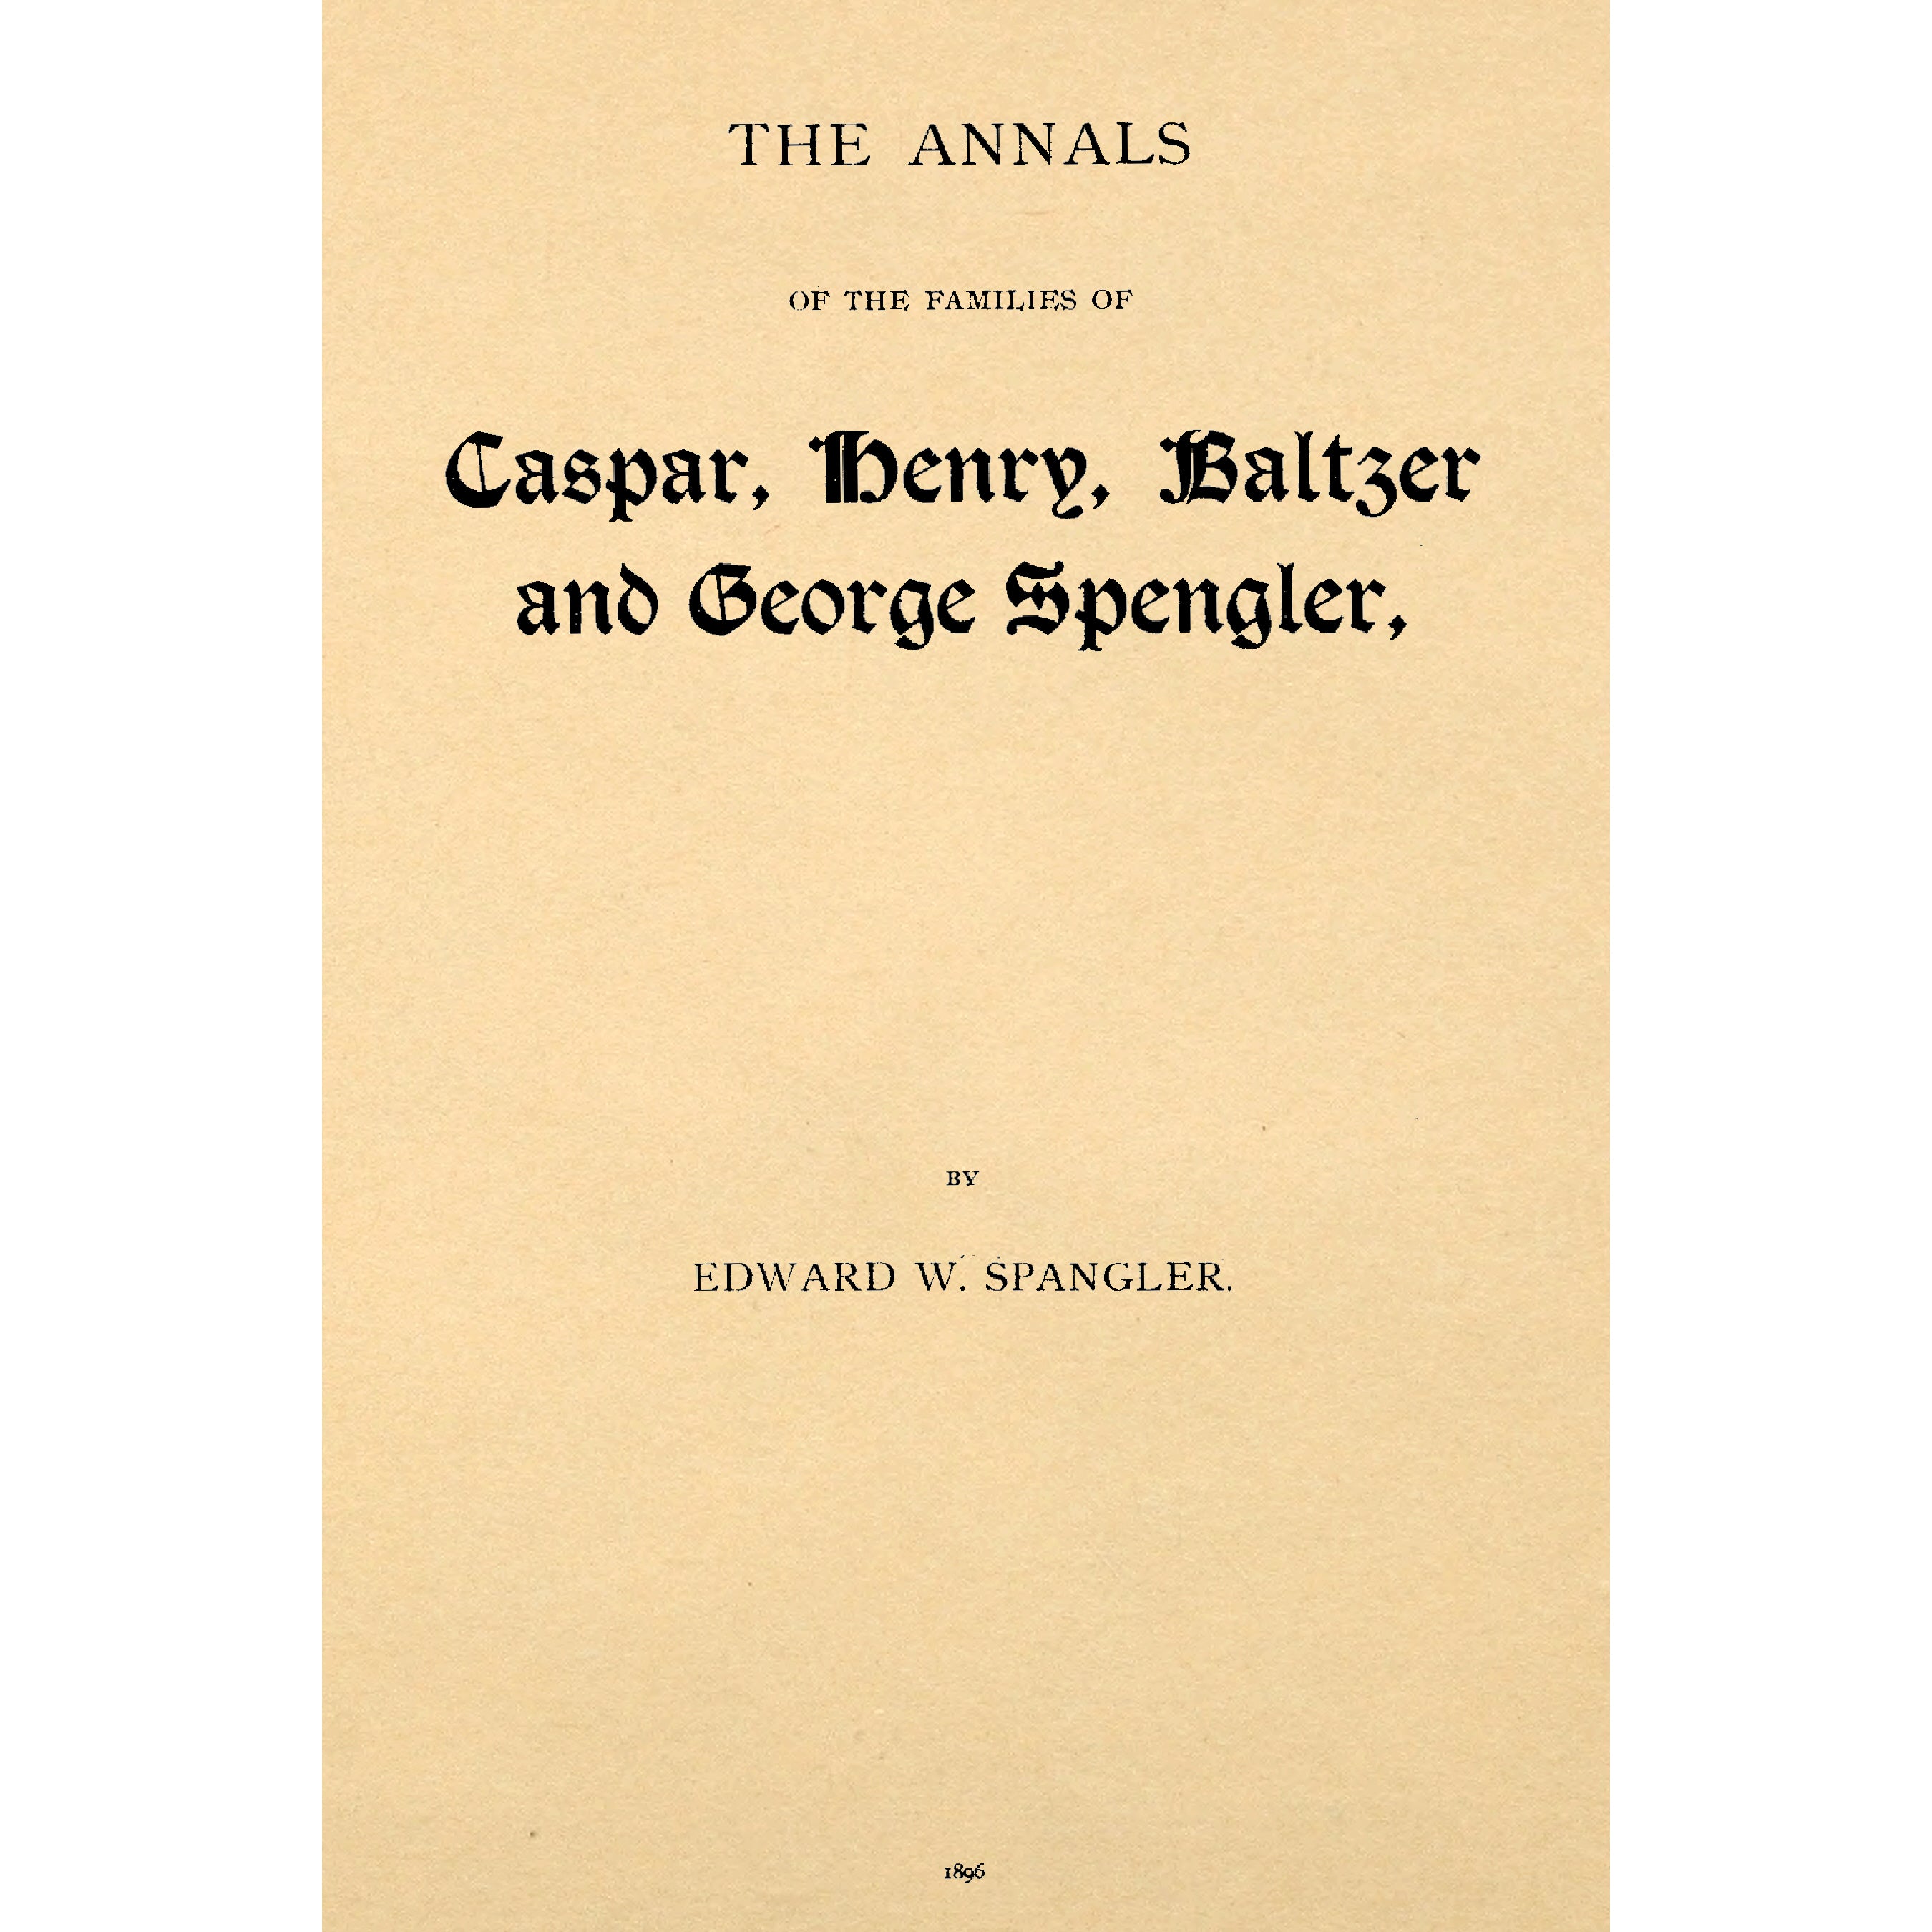 The Annals of the Families of Caspar, Henry, Baltzer and George Spengler,